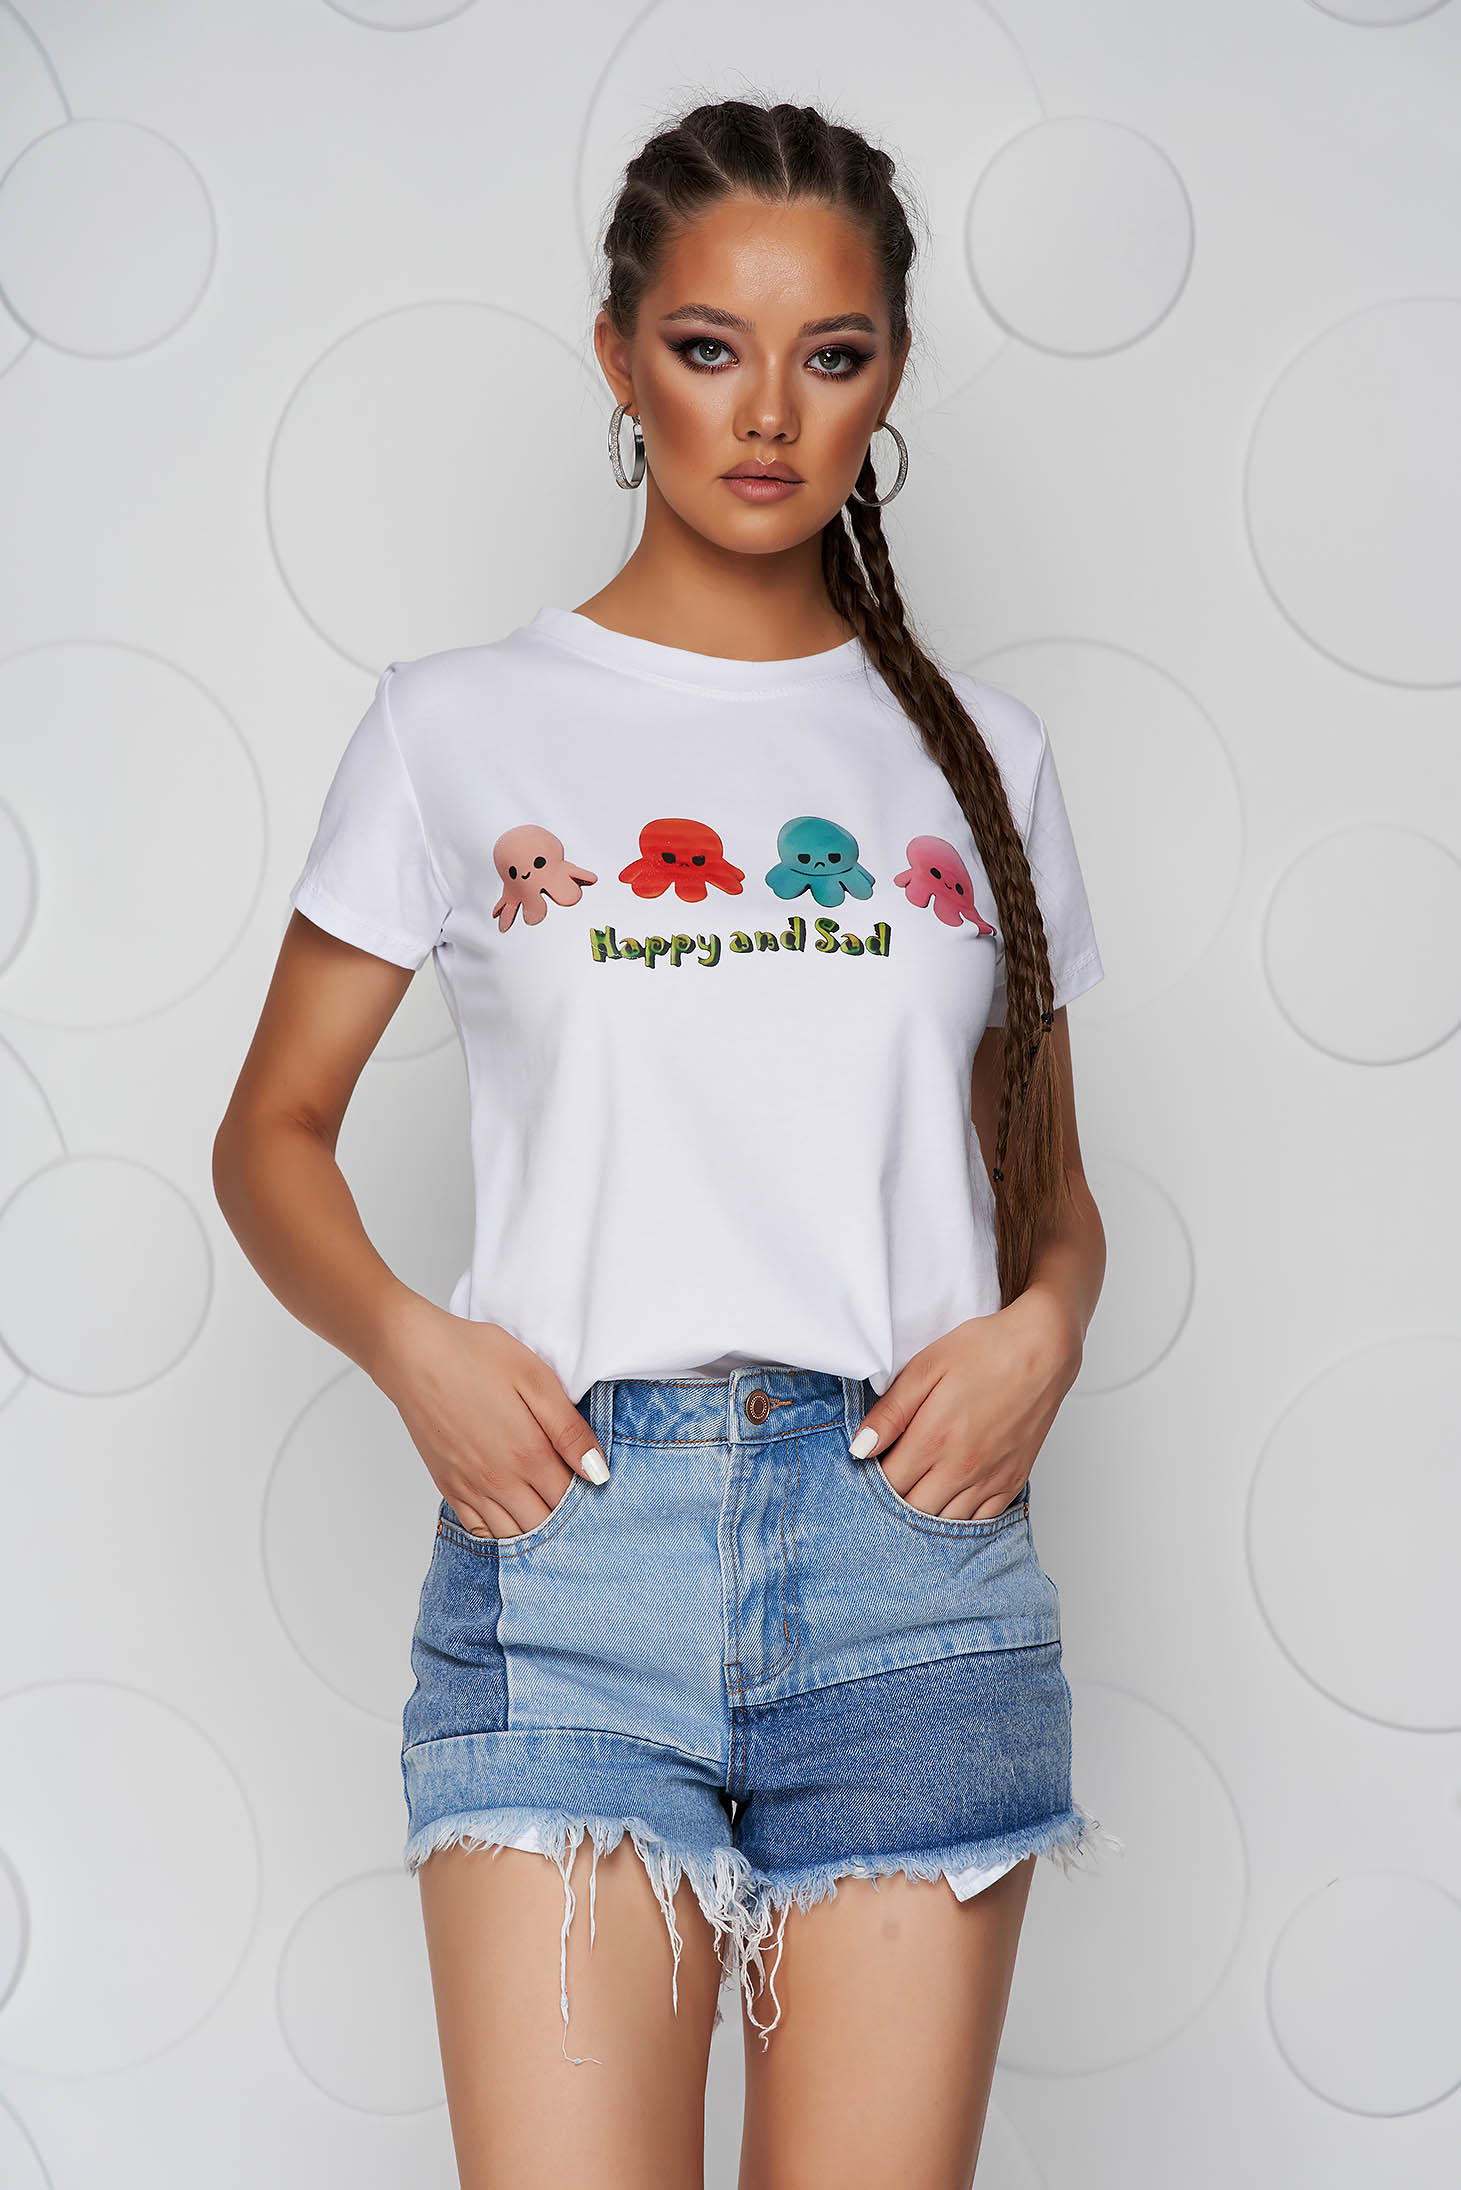 White t-shirt loose fit cotton with rounded cleavage with graphic details 1 - StarShinerS.com